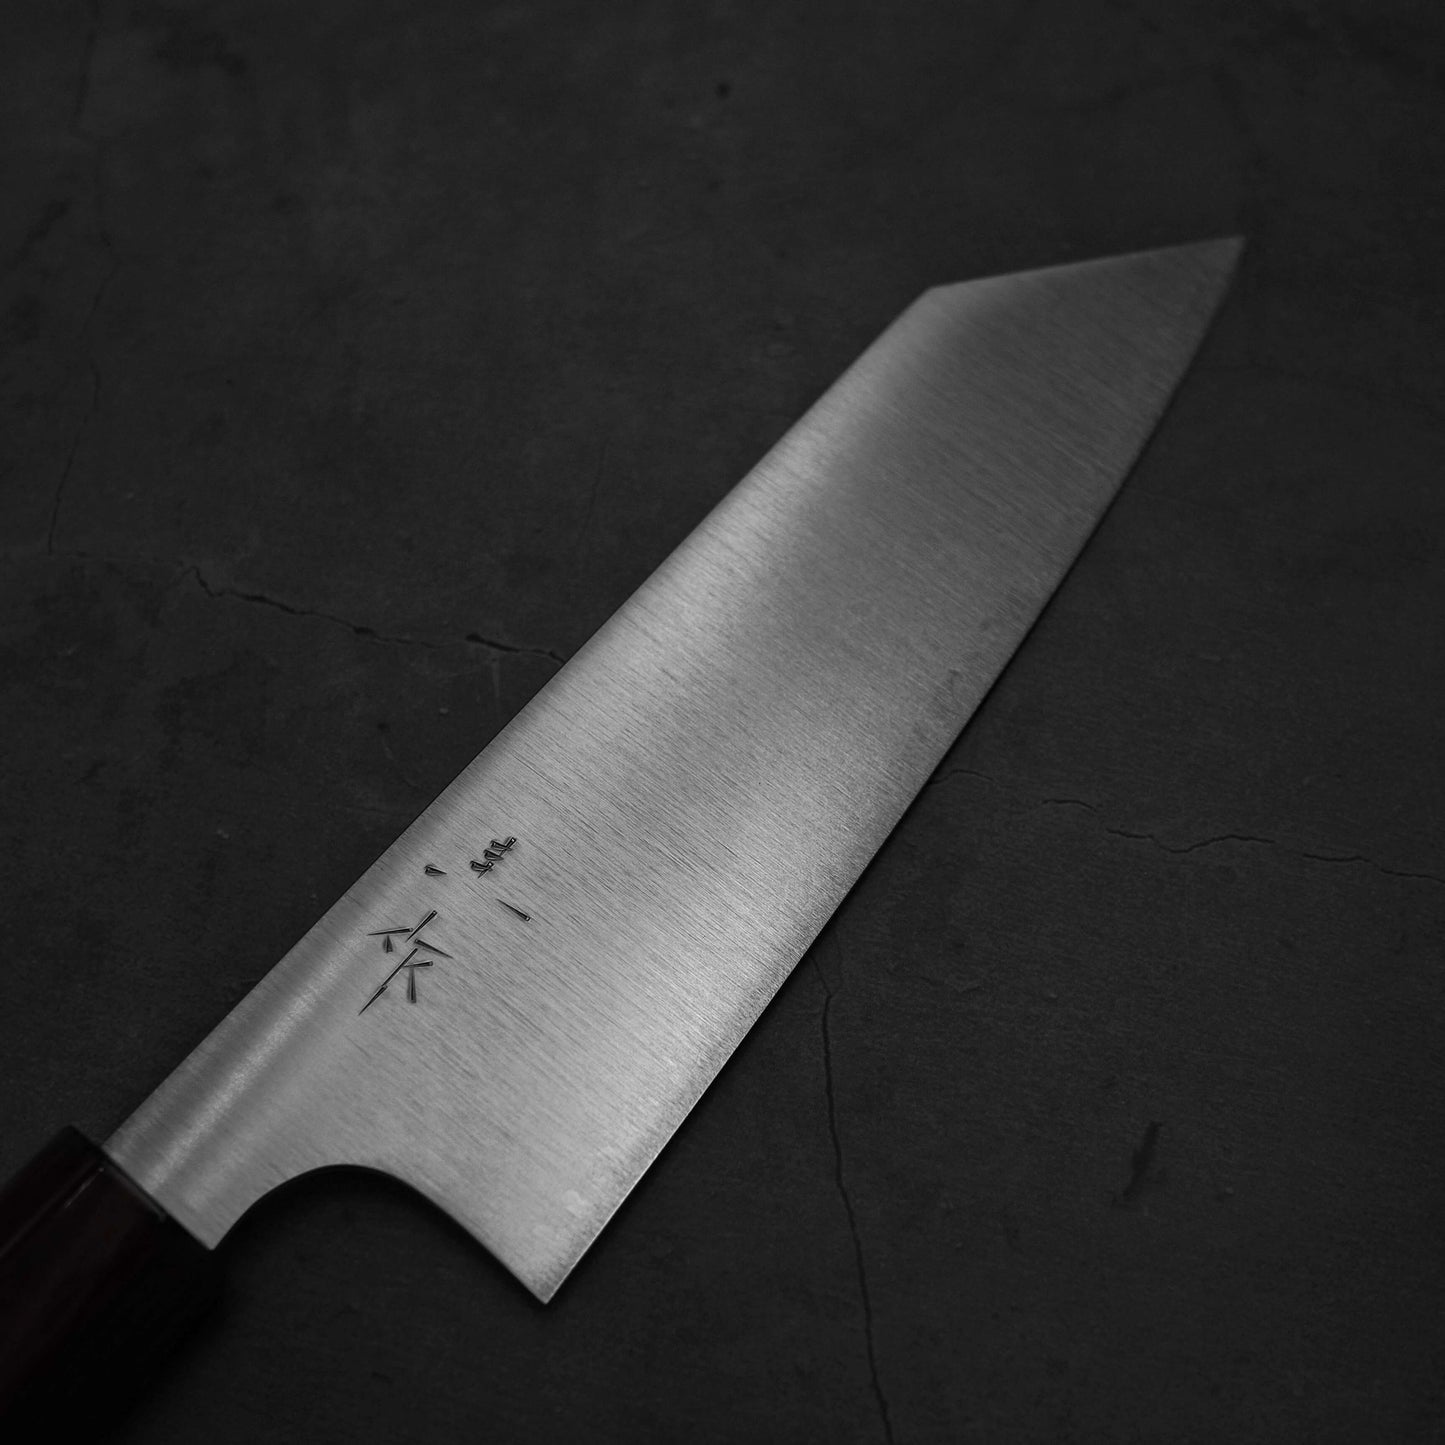 Top view of Kei Kobayashi SG2 bunka where it focuses on the right side of the blade only